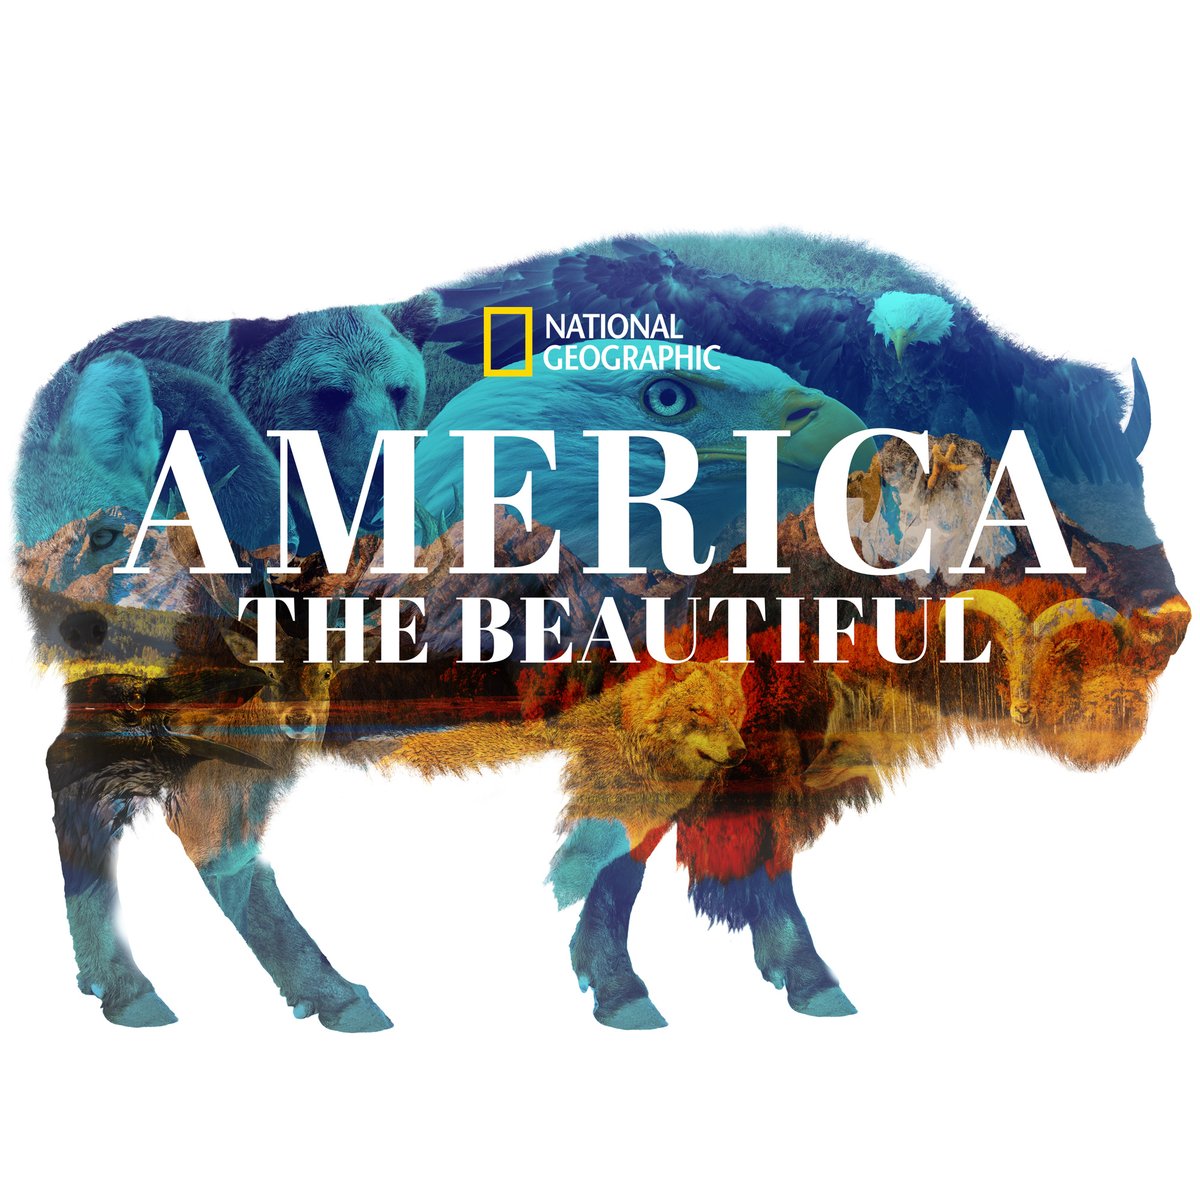 America The Beautiful is the ambitious story of North America. It's a journey across her visually spectacular regions as seen through the eyes of its iconic species. Coming to  @DisneyPlus.